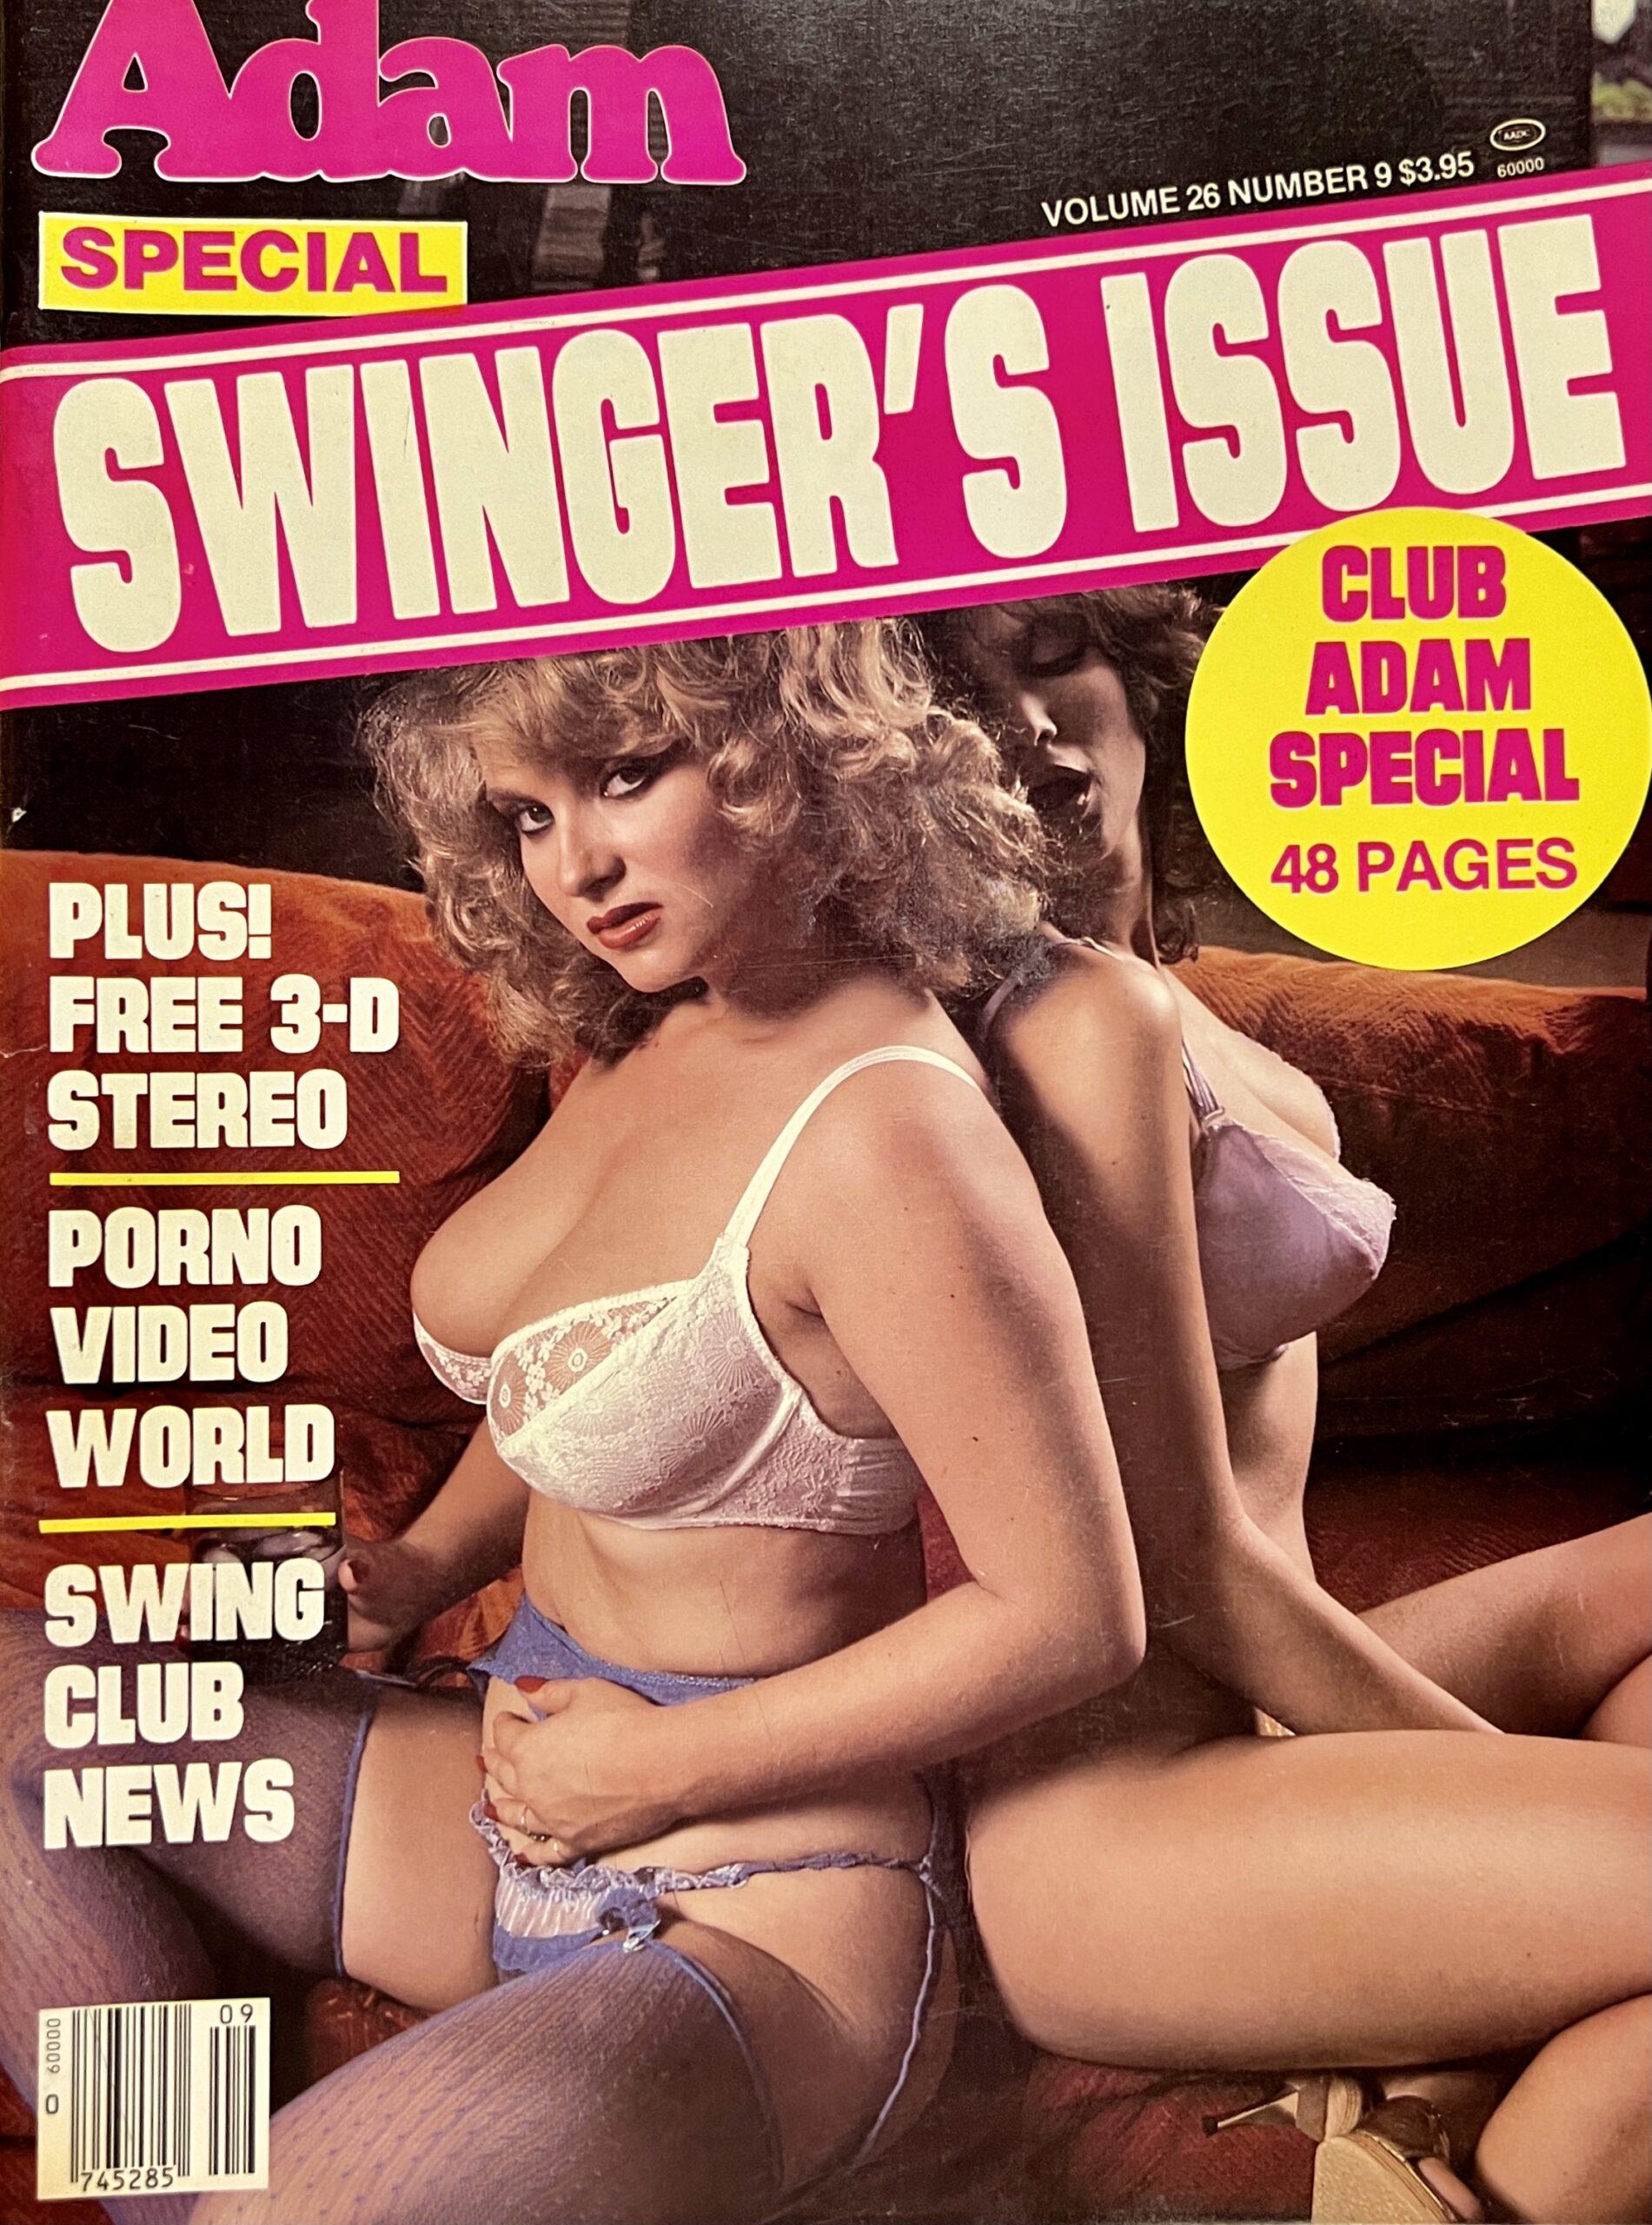 Adam Special Swingers issue 26/9 September 1982 Adult Swingers and Personals